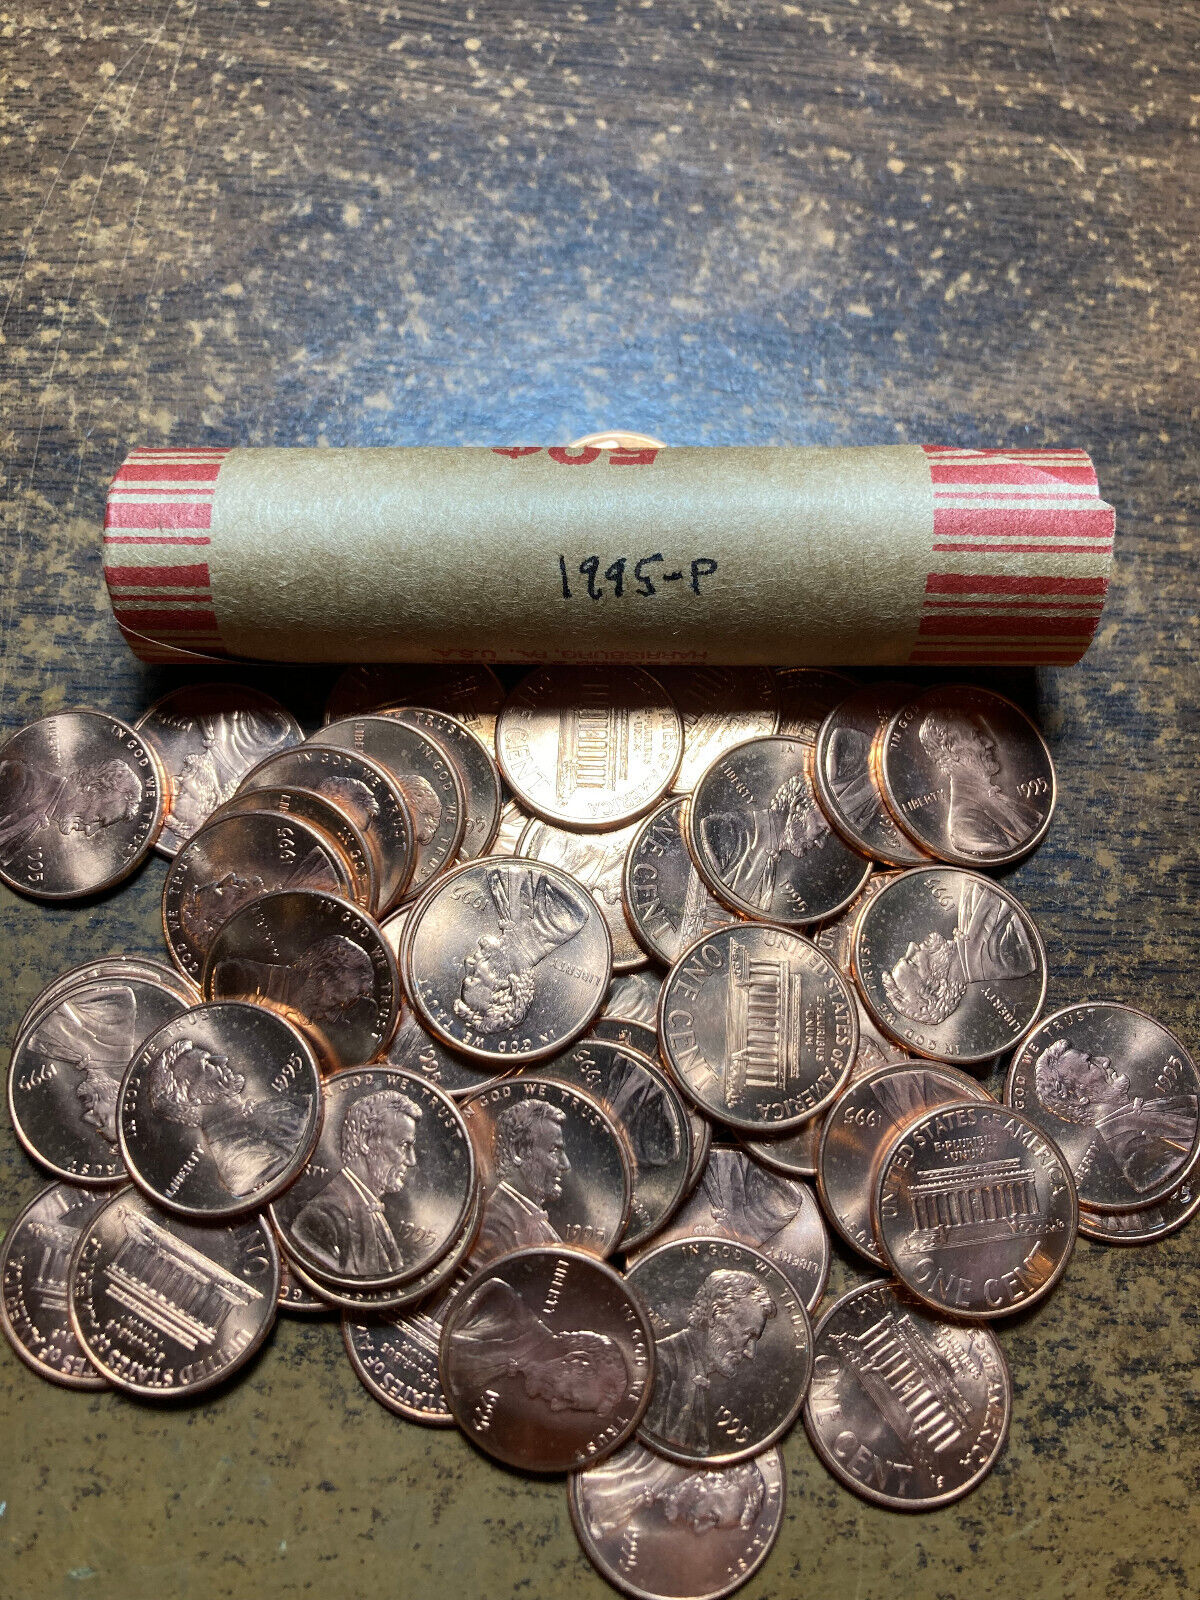 1995 (P) LINCOLN MEMORIAL CENT PENNY ROLL, BU 50 COINS unsearched for double die